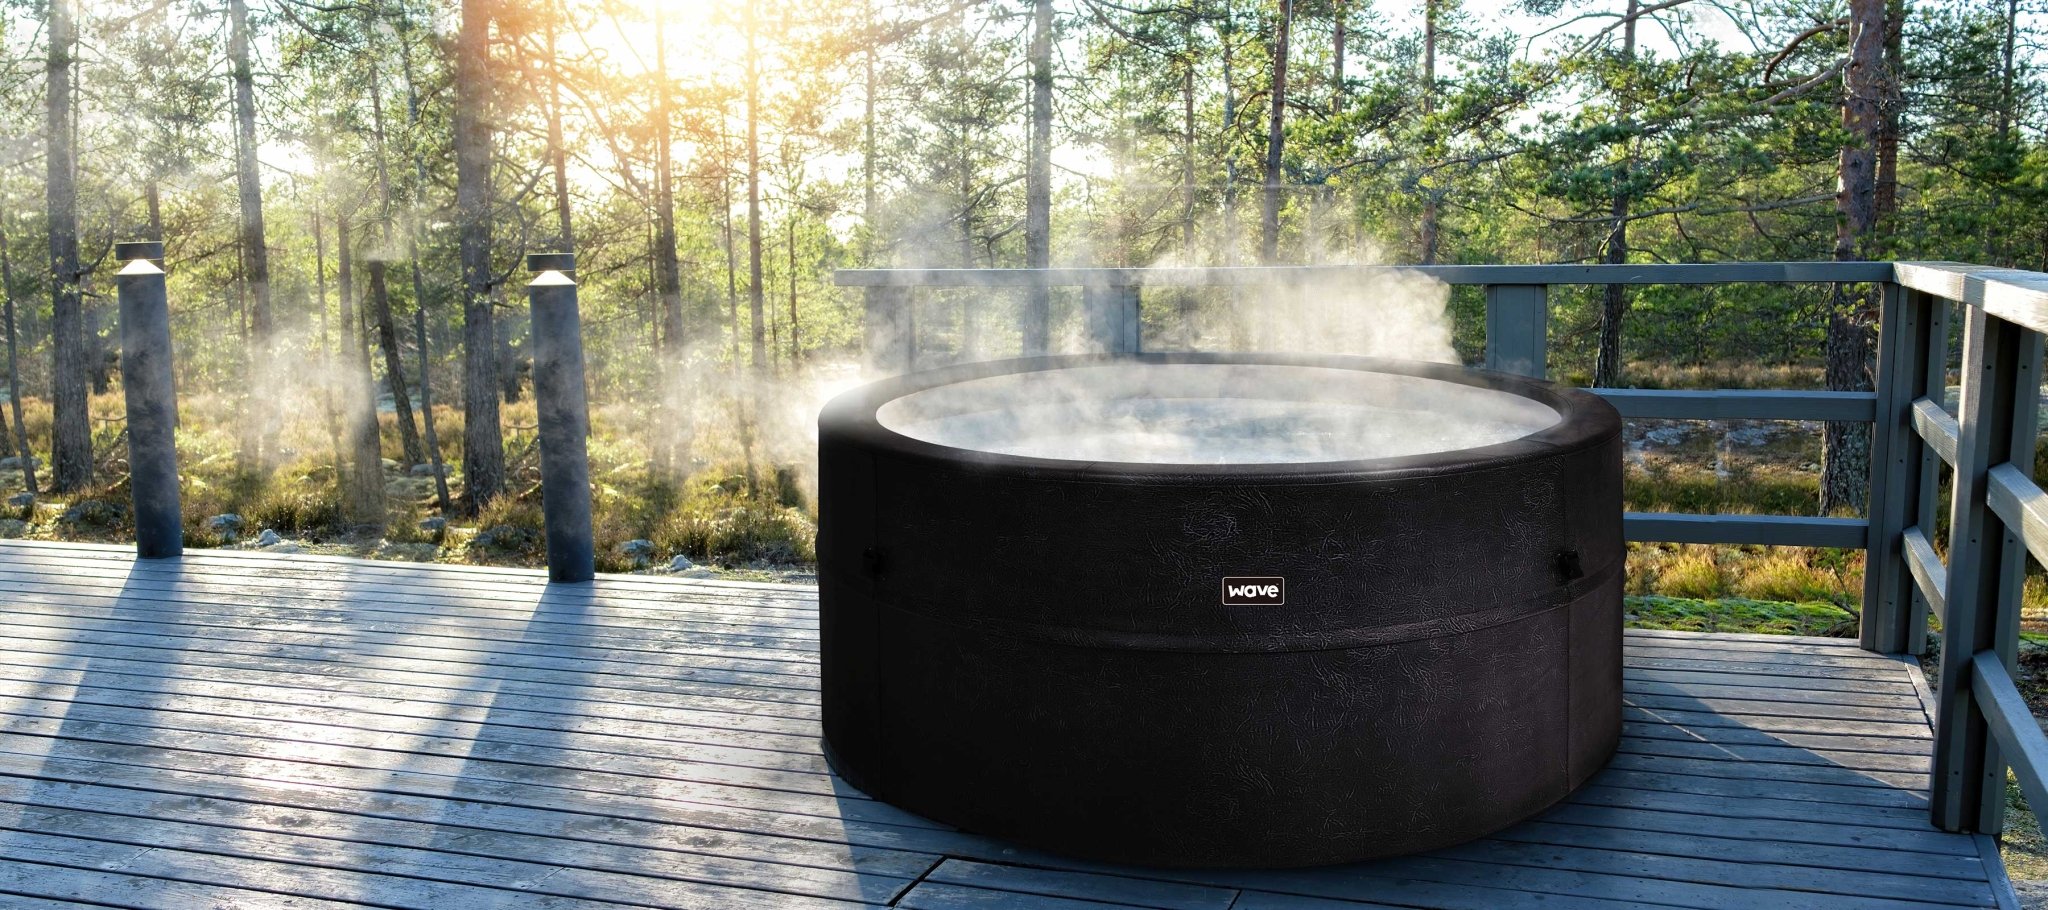 Embrace Winter Warmth: The Benefits of Hot Tubs in the Cold Season - Wave Spas USA